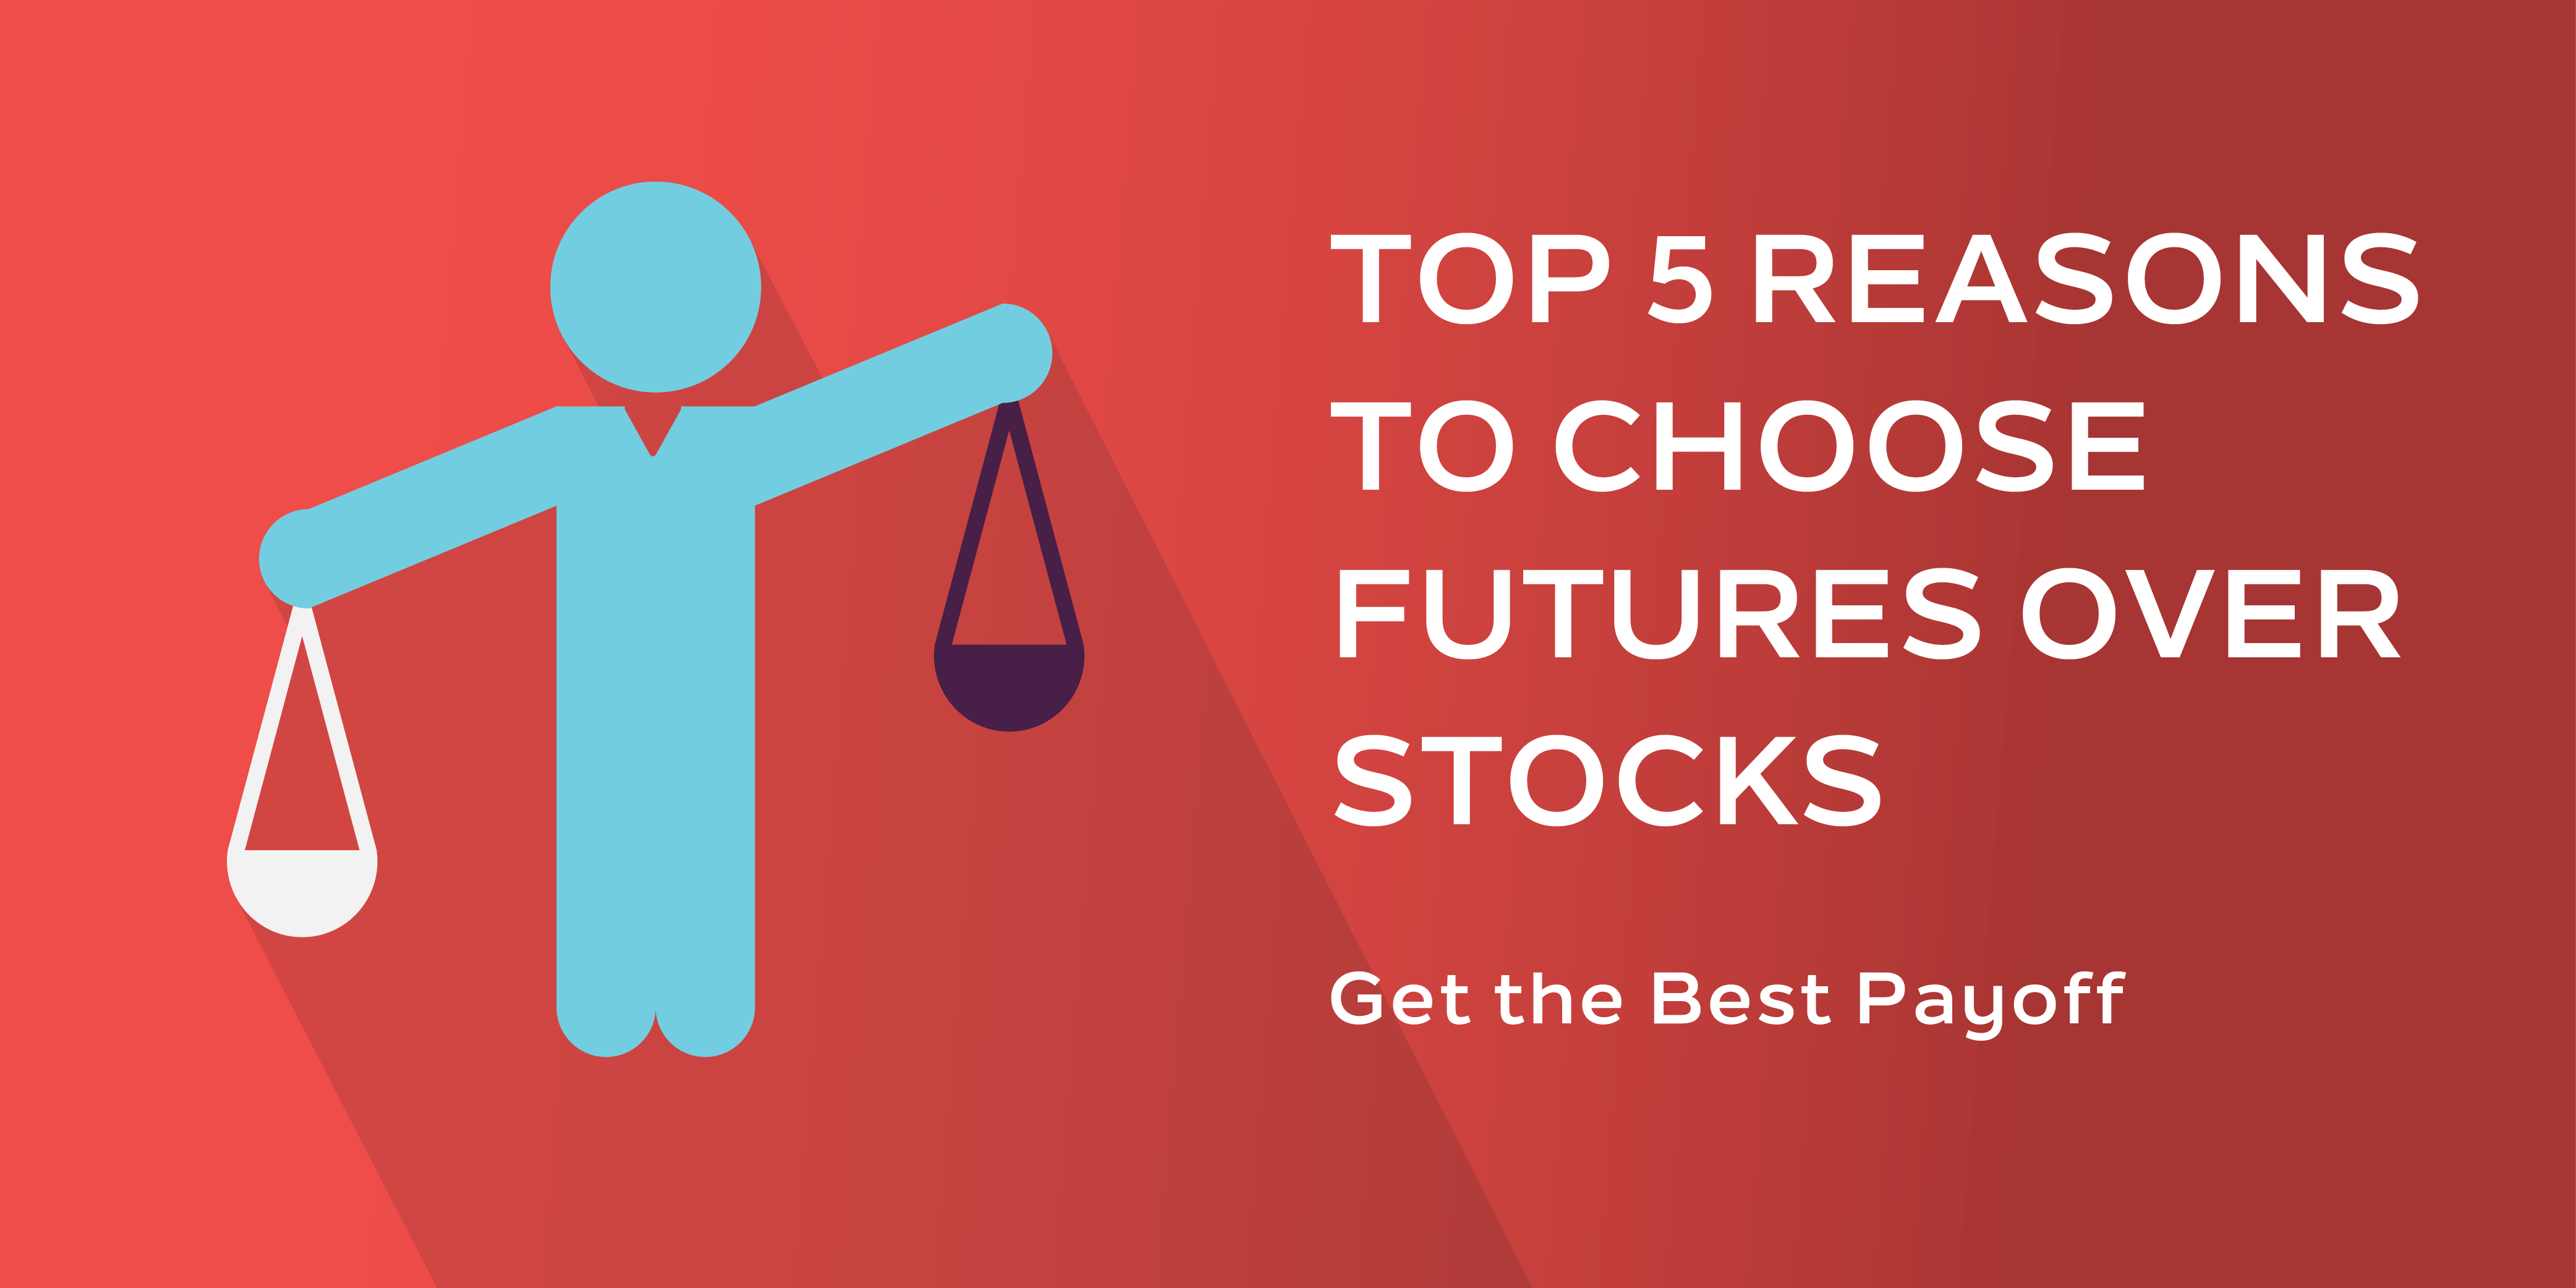 Top 5 Reasons to Choose Futures Over Stocks